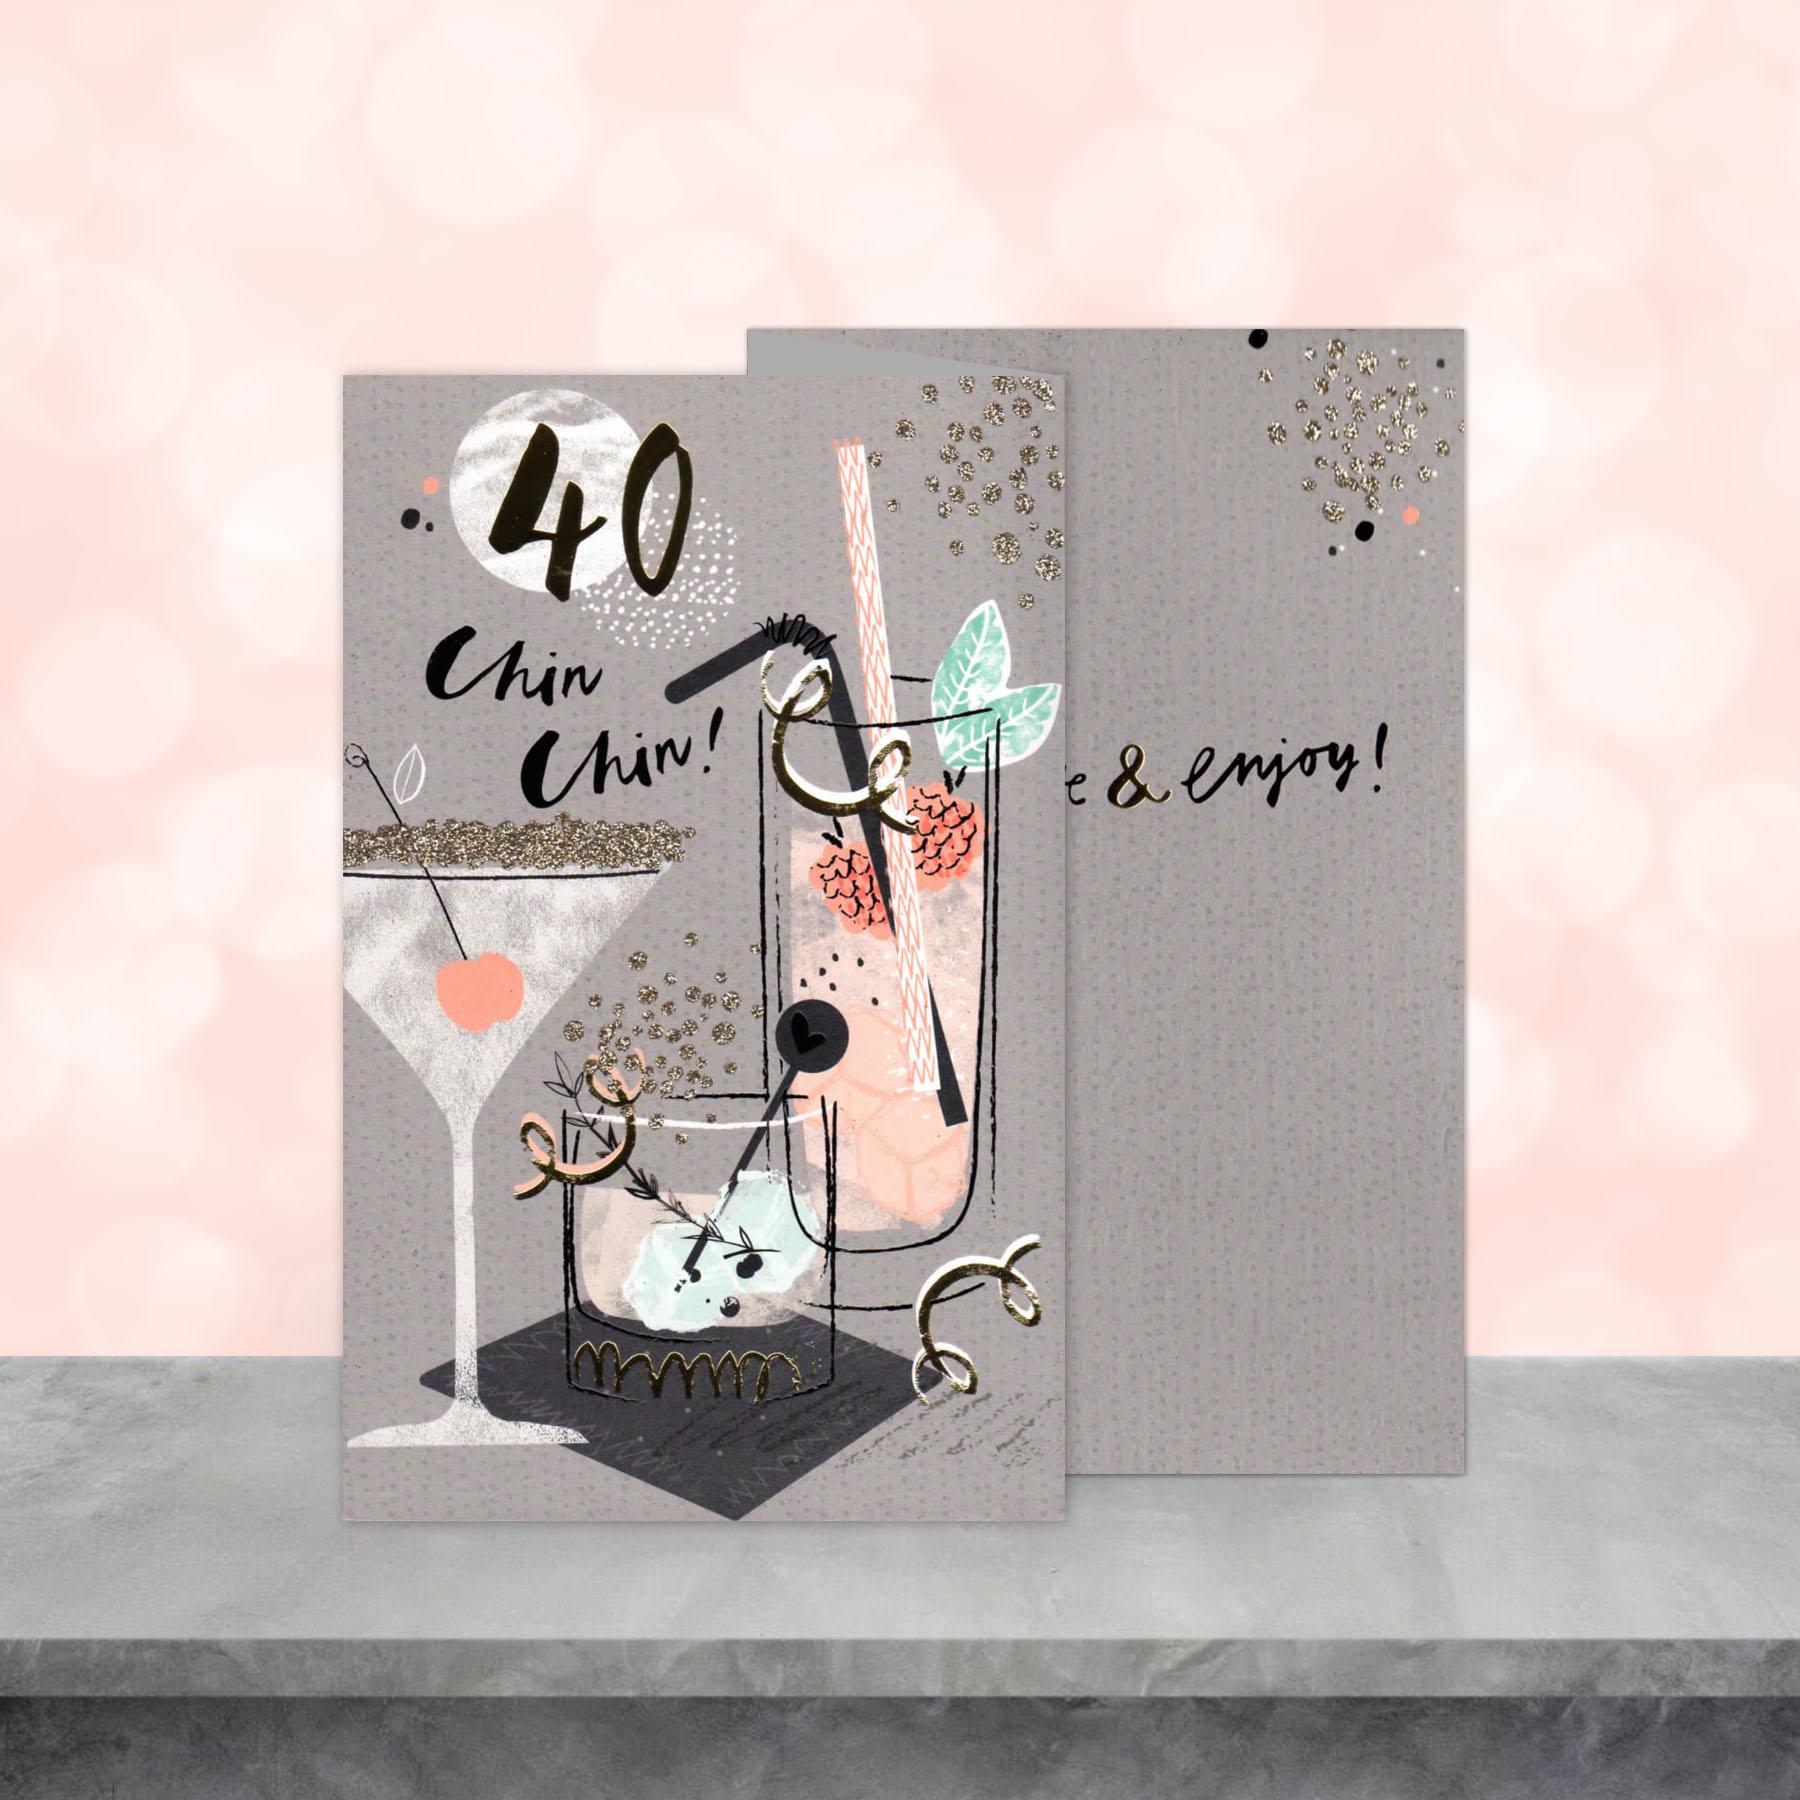 Image Showing A 40th Birthday Card Sitting On The Shelf